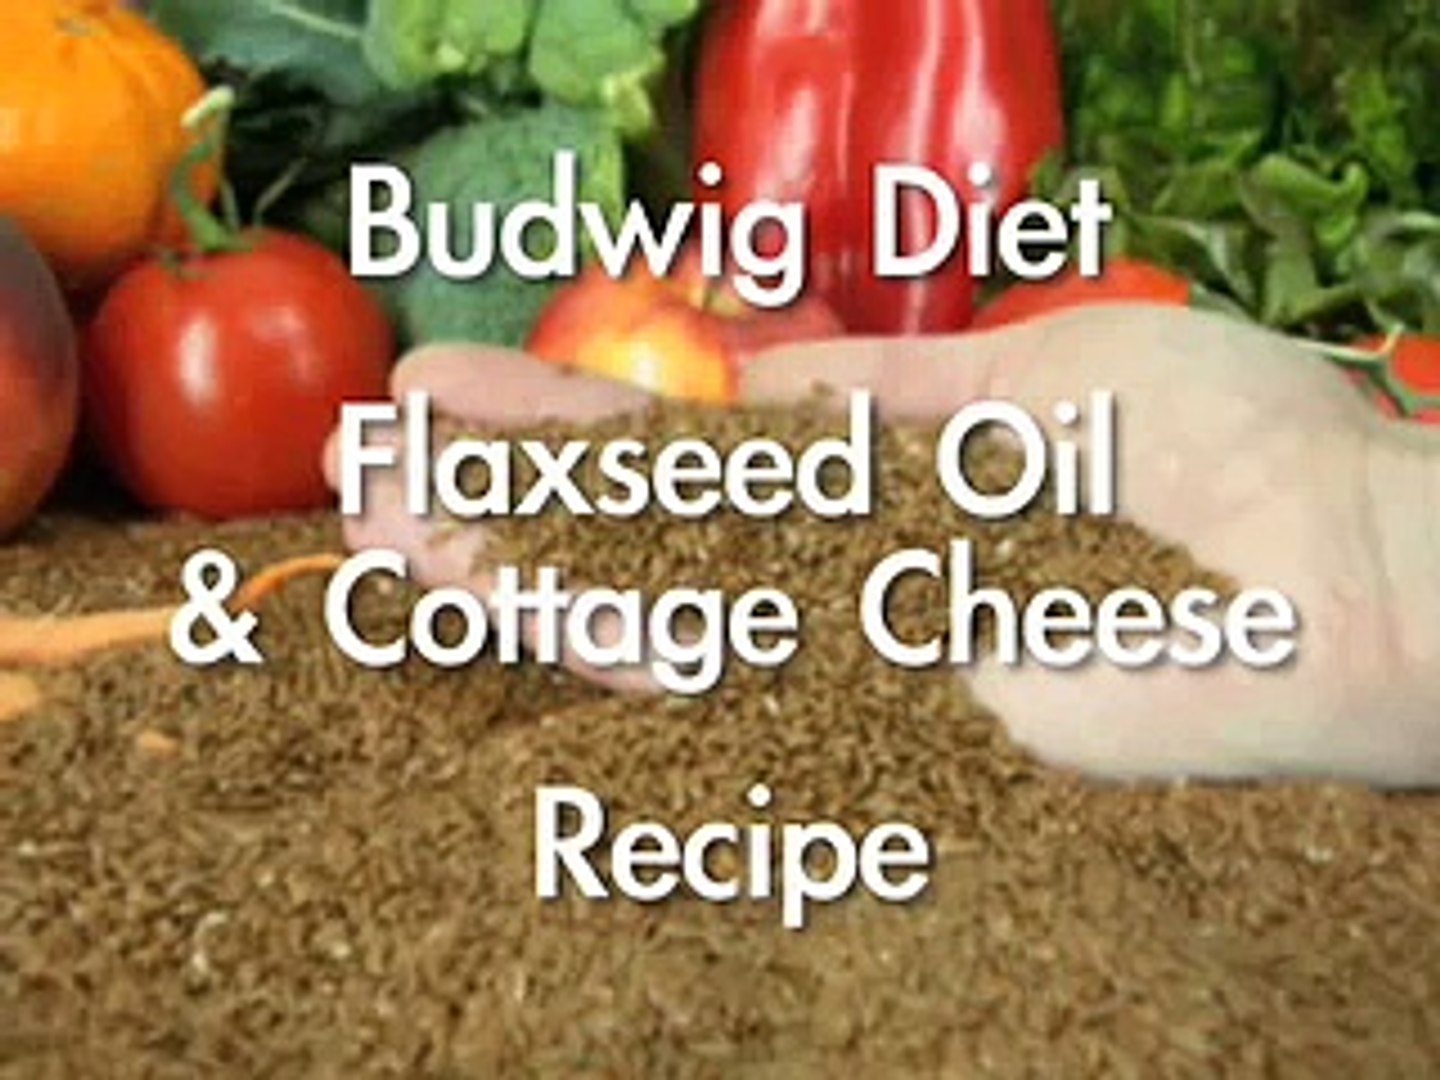 Flaxseed Oil And Cottage Cheese The Budwig Diet For Cancer